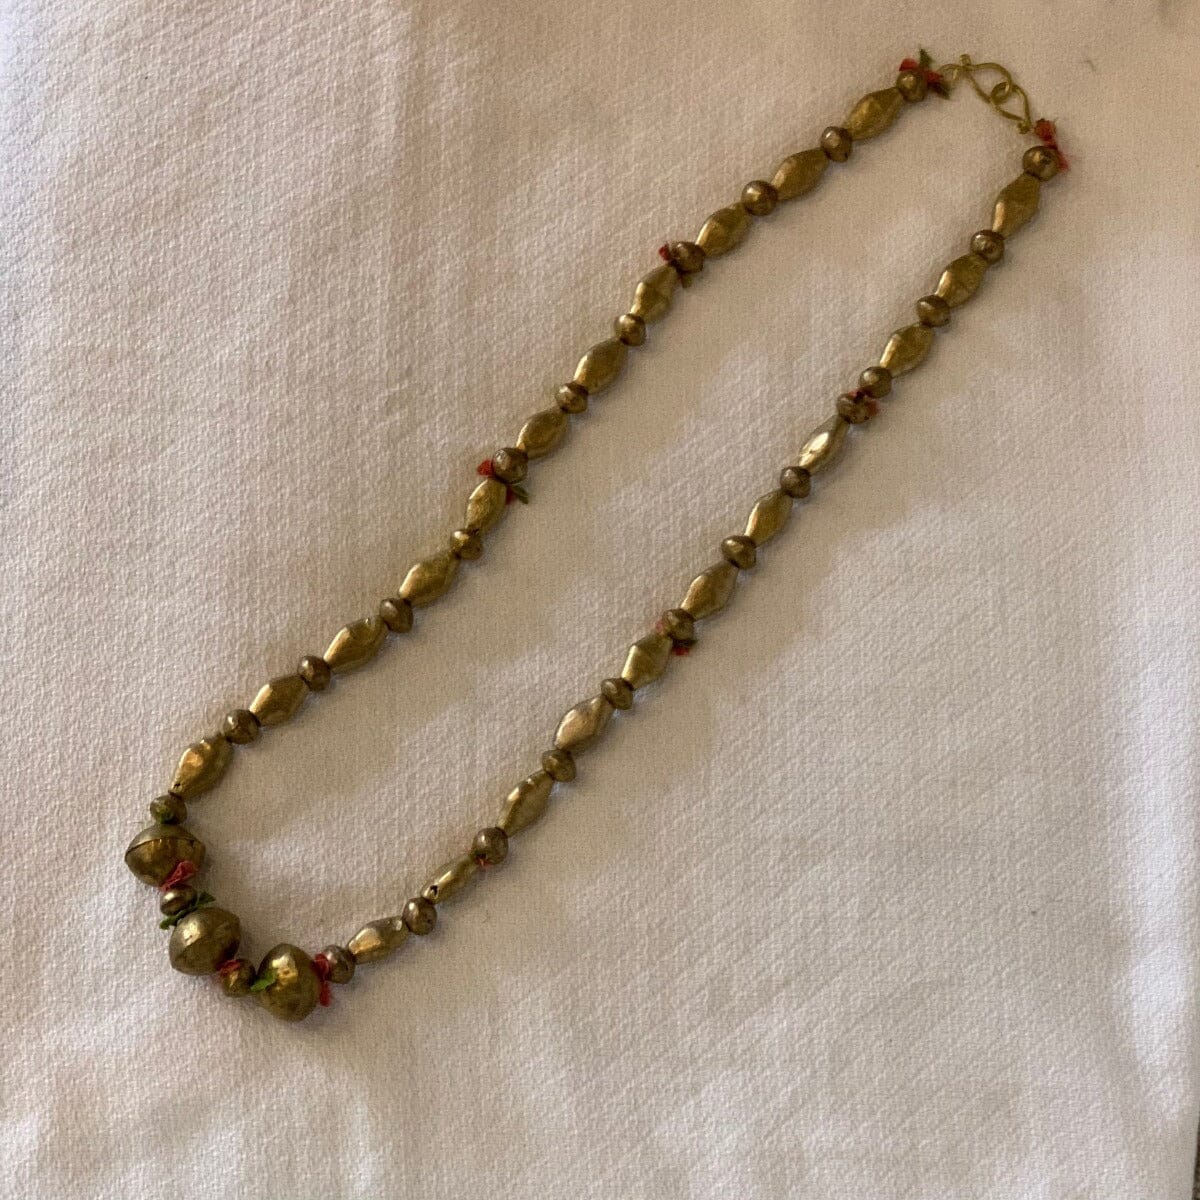 Vintage African Brass Beaded Necklace with Cloth Spacers Necklace B. Viz Design 